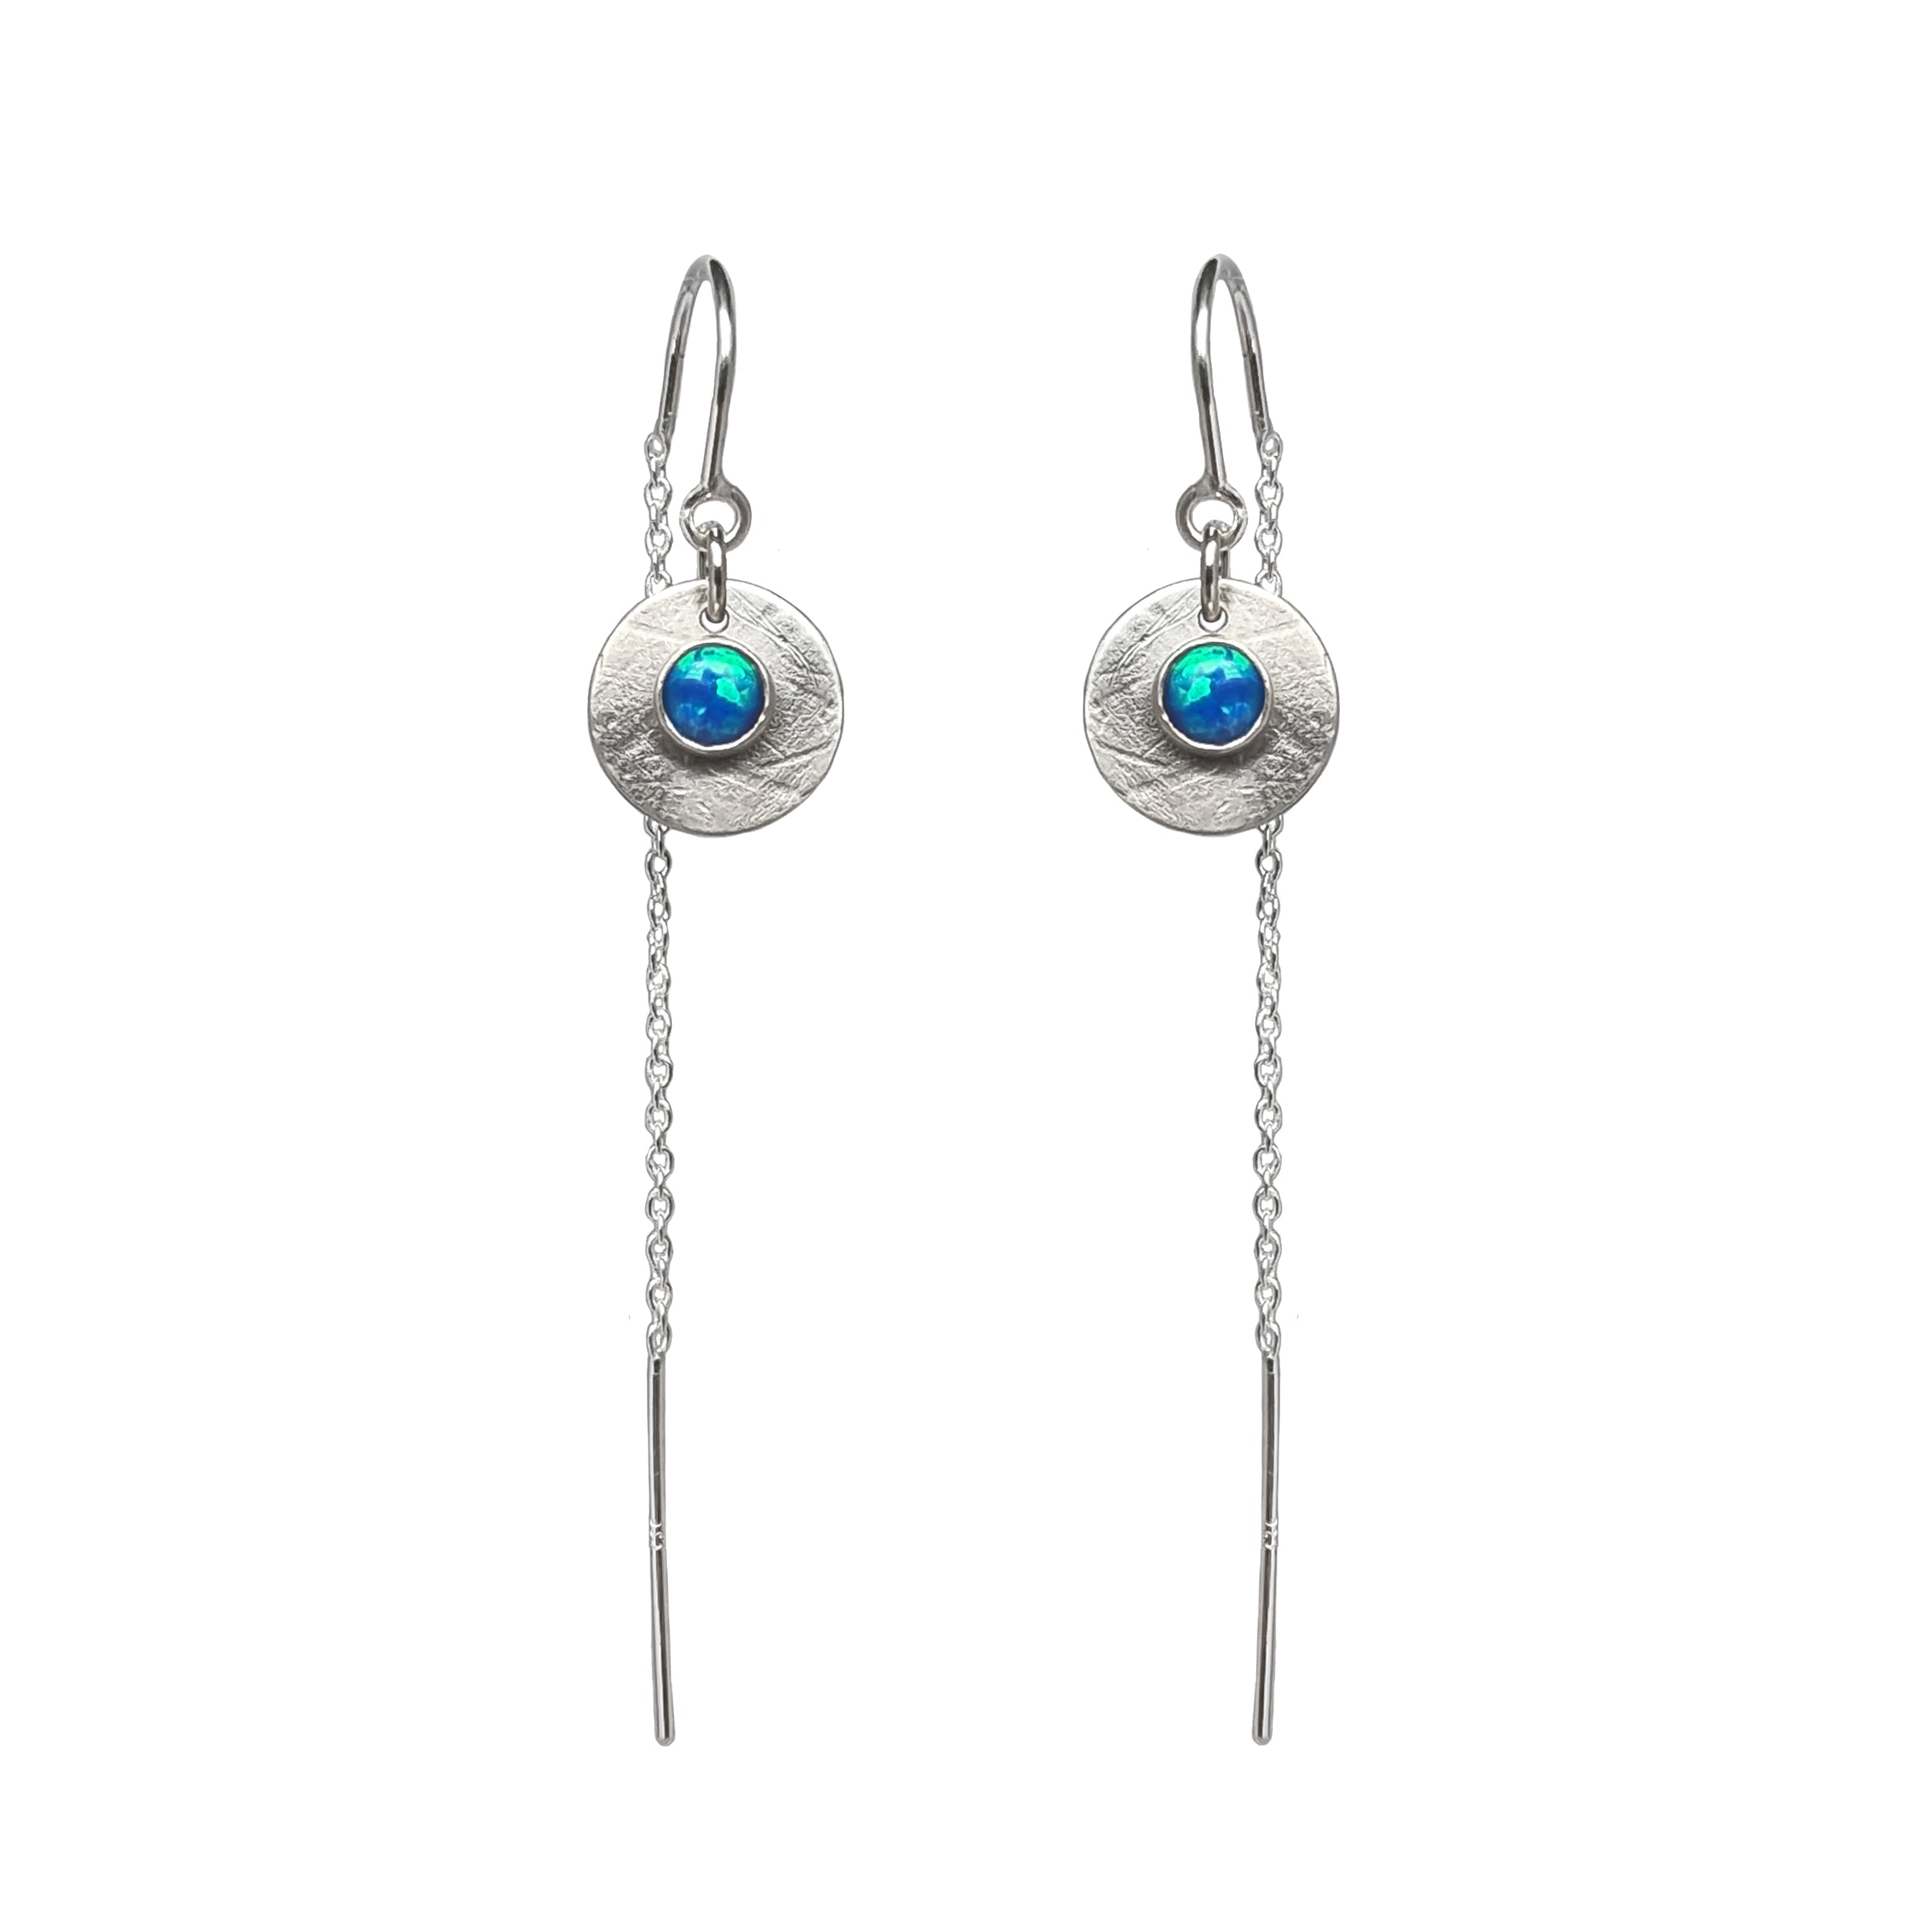 Product photo on a white background of the Galaxy Opal Thread Earrings, handmade by Emily Eliza Arlotte Handcrafted Fine Jewellery in Tasmania, Australia